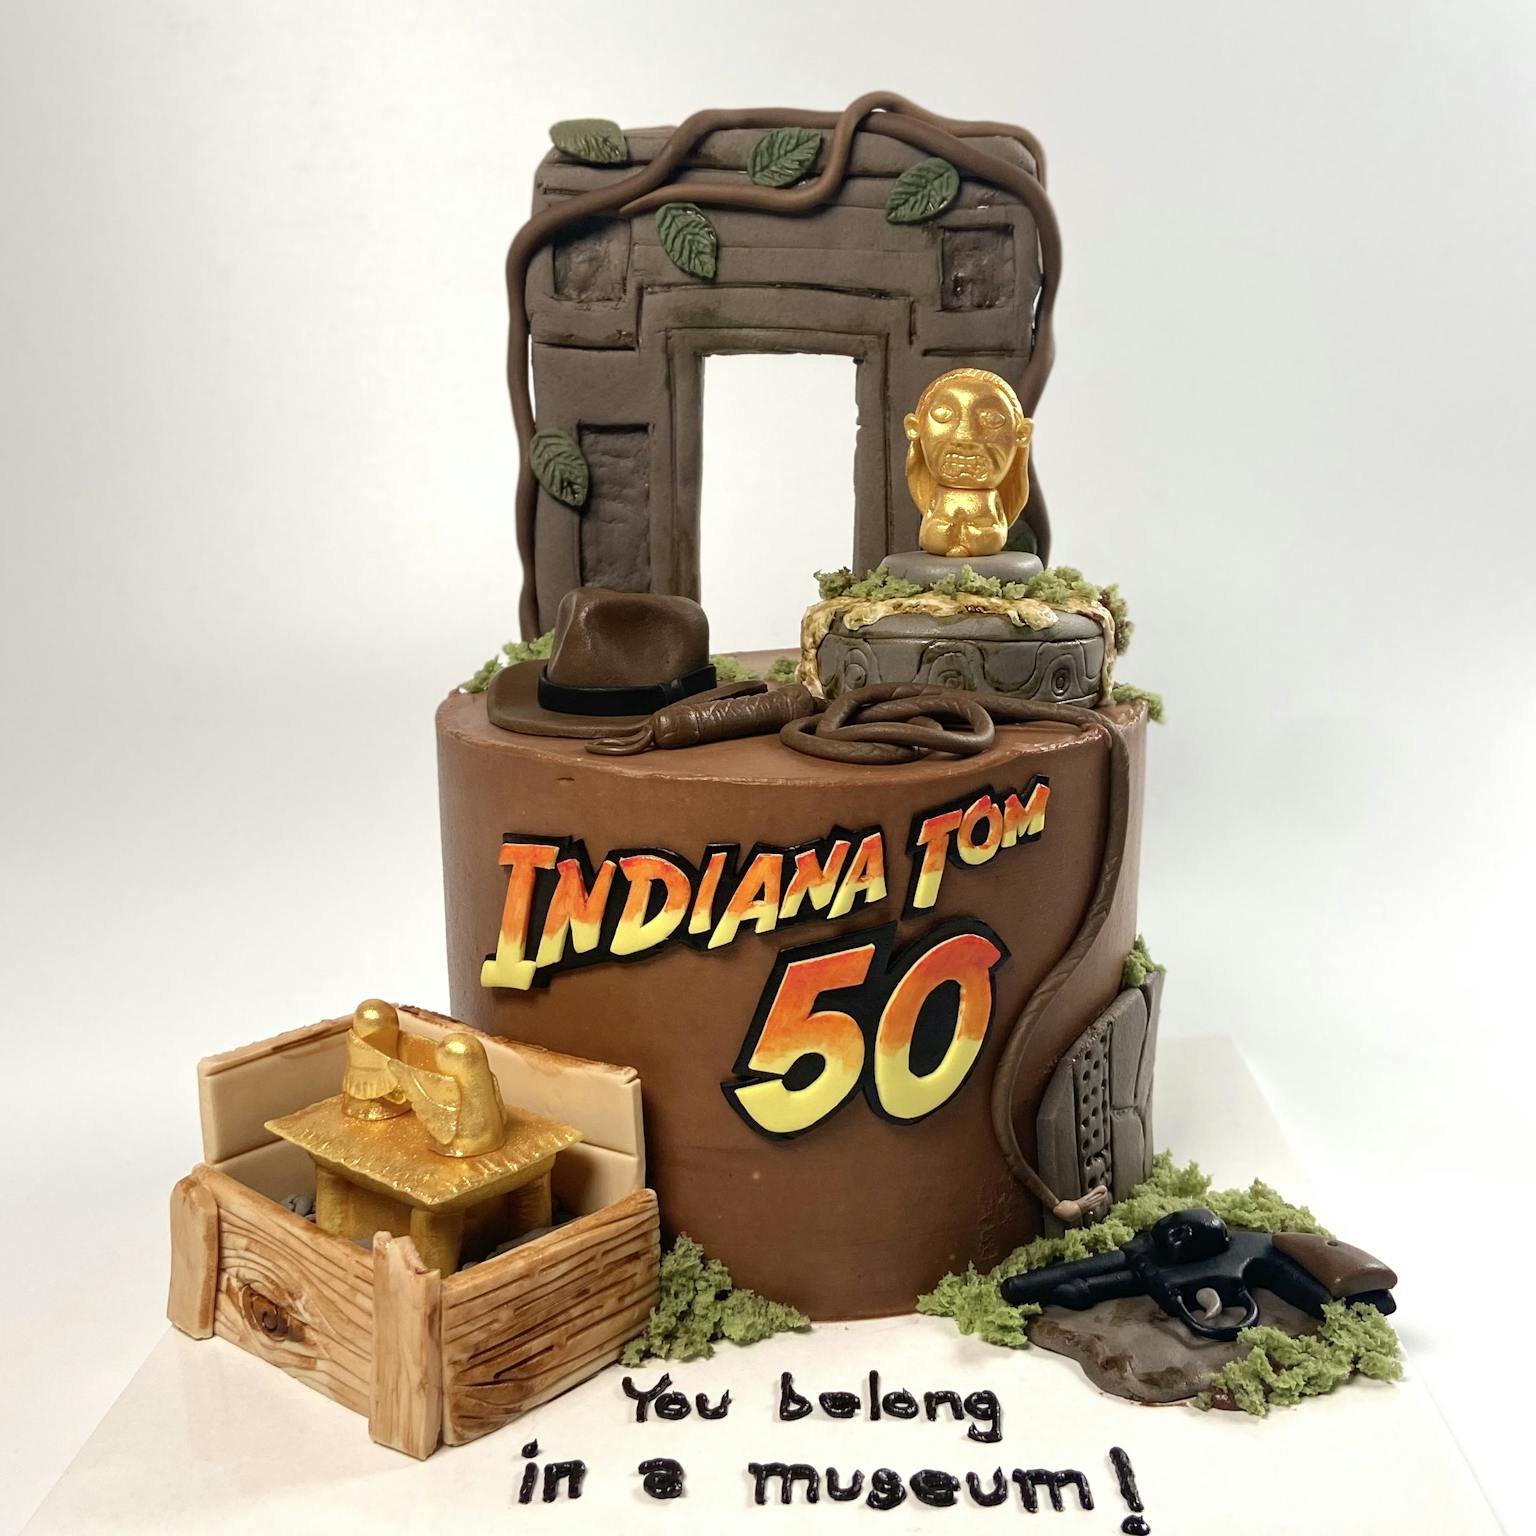 100% edible fondant sculpted Indiana Jones themed birthdy cake with idol, whip, hat and Arc of the Covenant